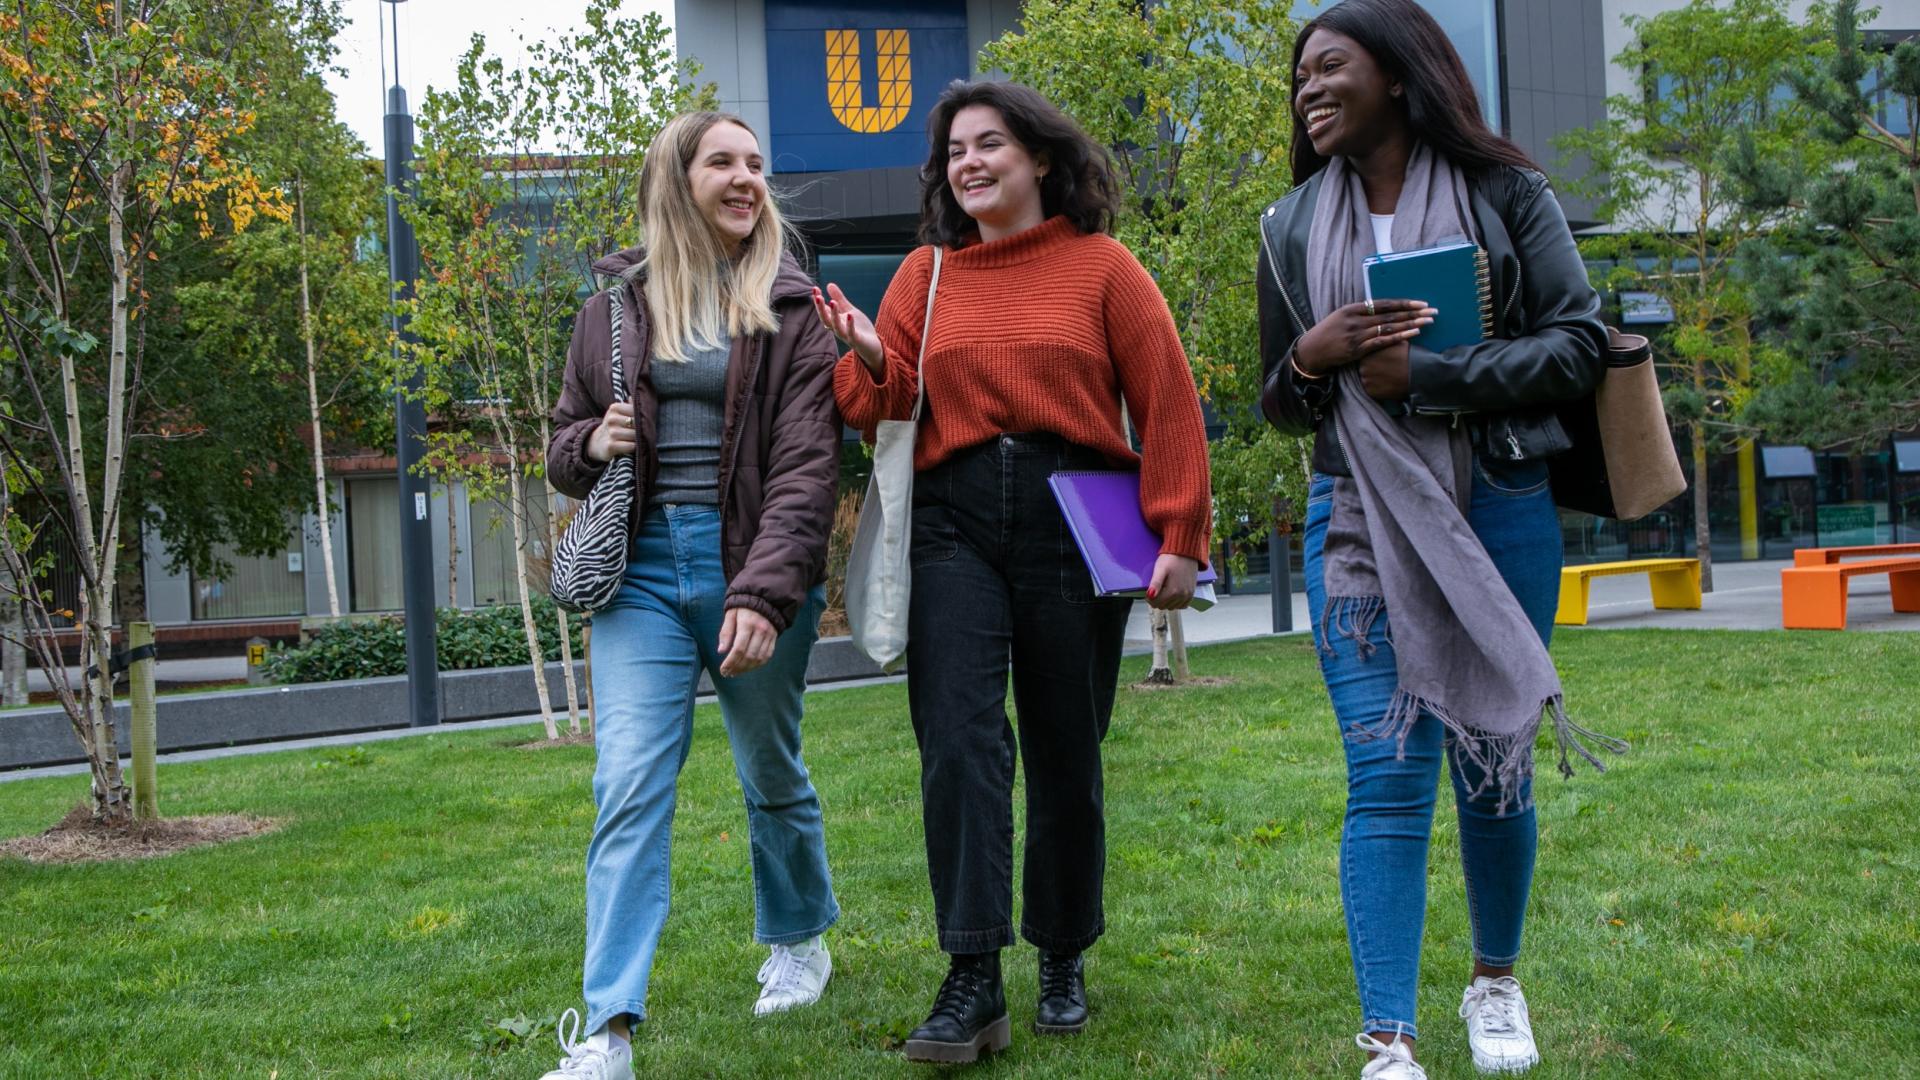 Image showing a group of female students on DCU's Glasnevin campus